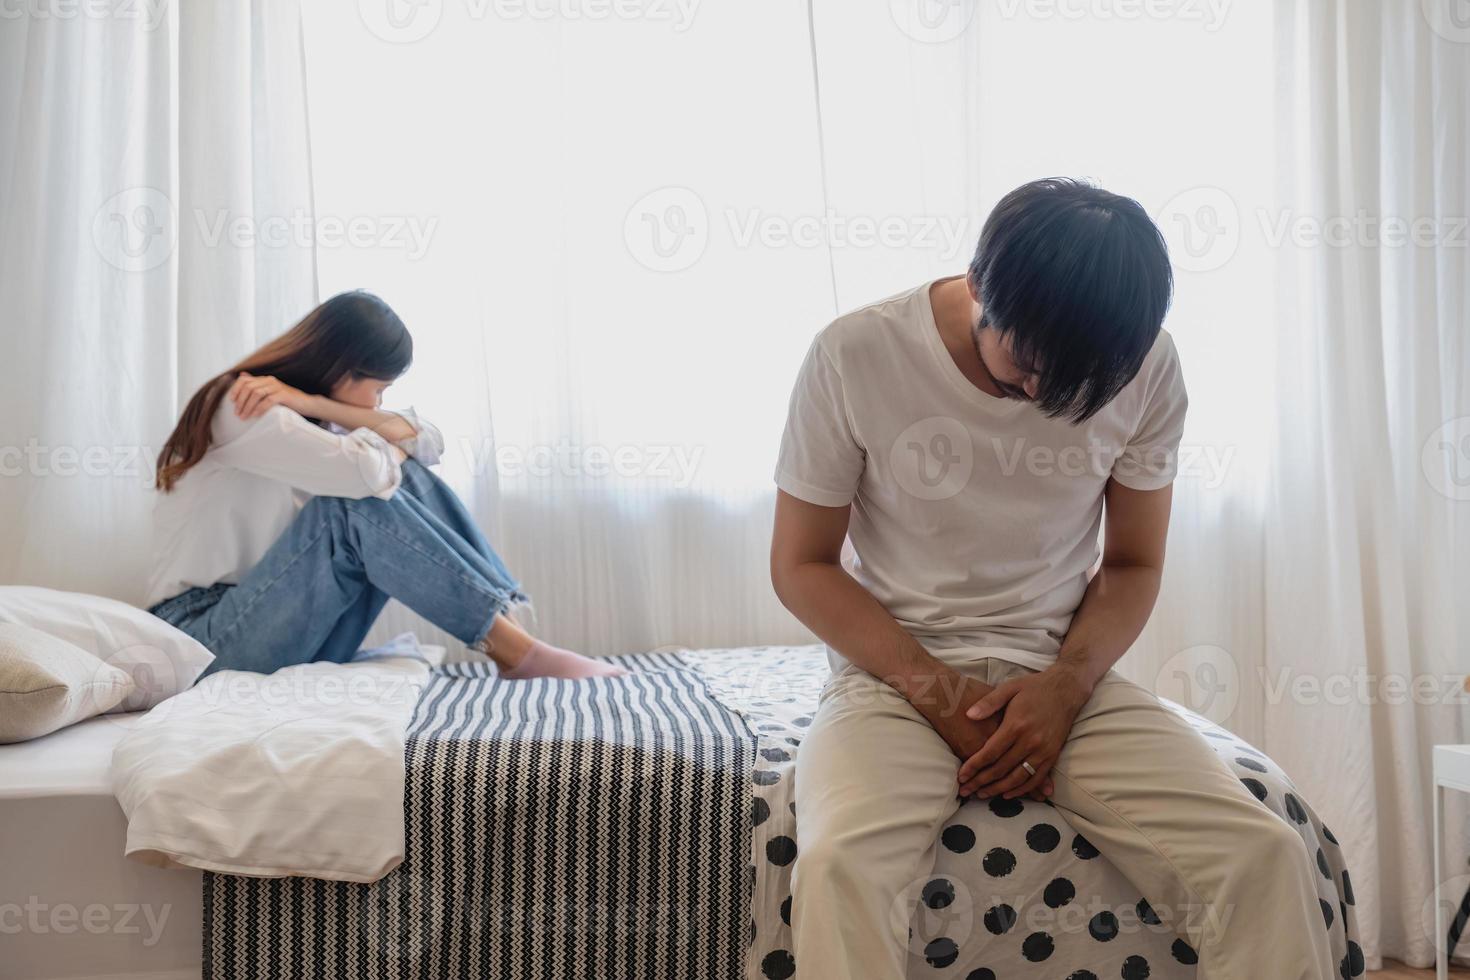 The husband is unhappy and disappointed in the erectile dysfunction during sex while his wife sleeping on the picture